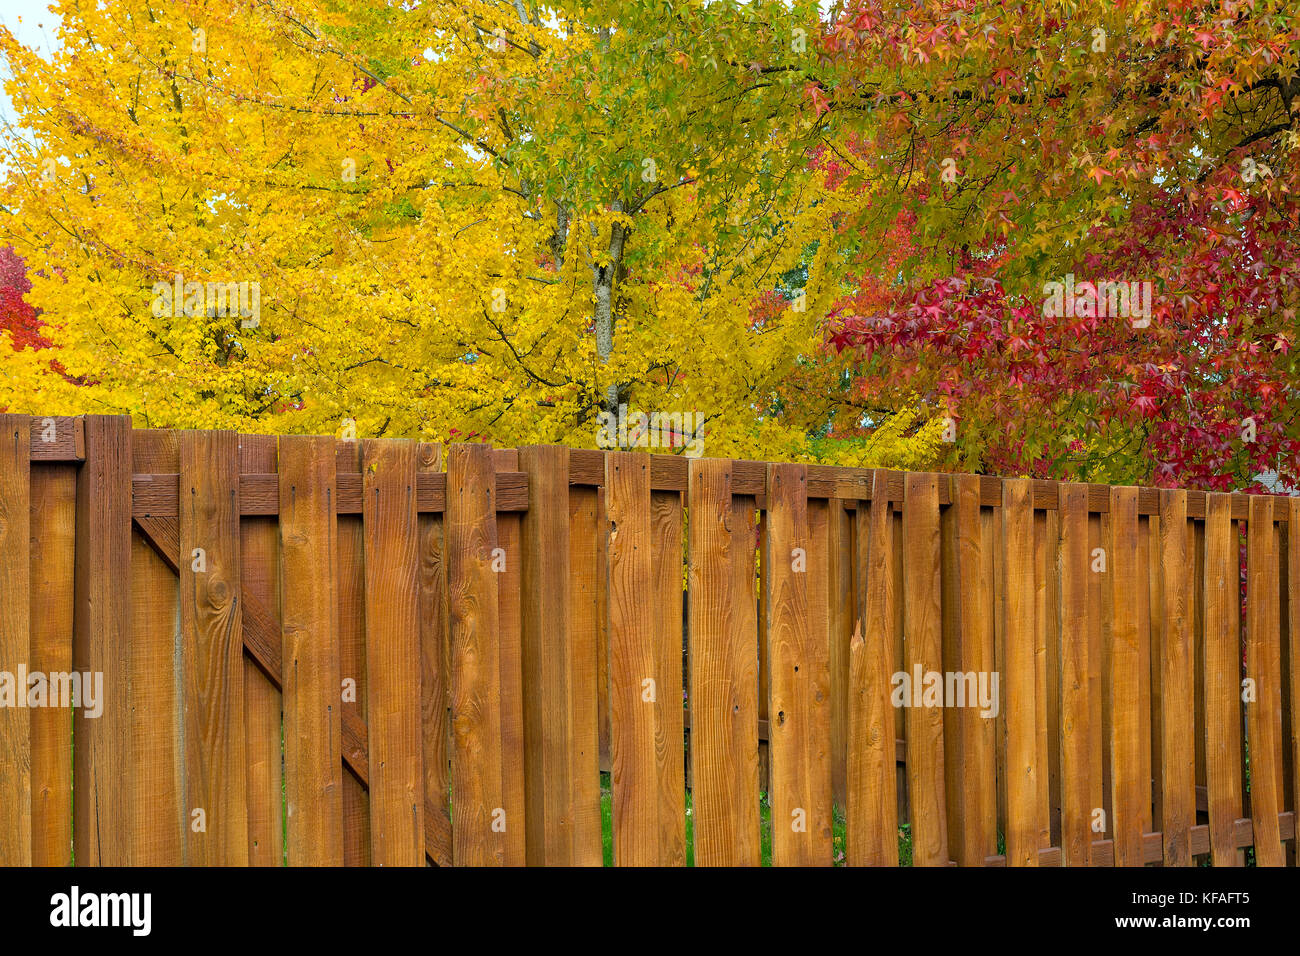 Maple Sweetgum Trees in bright vibrant peak fall colors by garden backyard wood fence Stock Photo